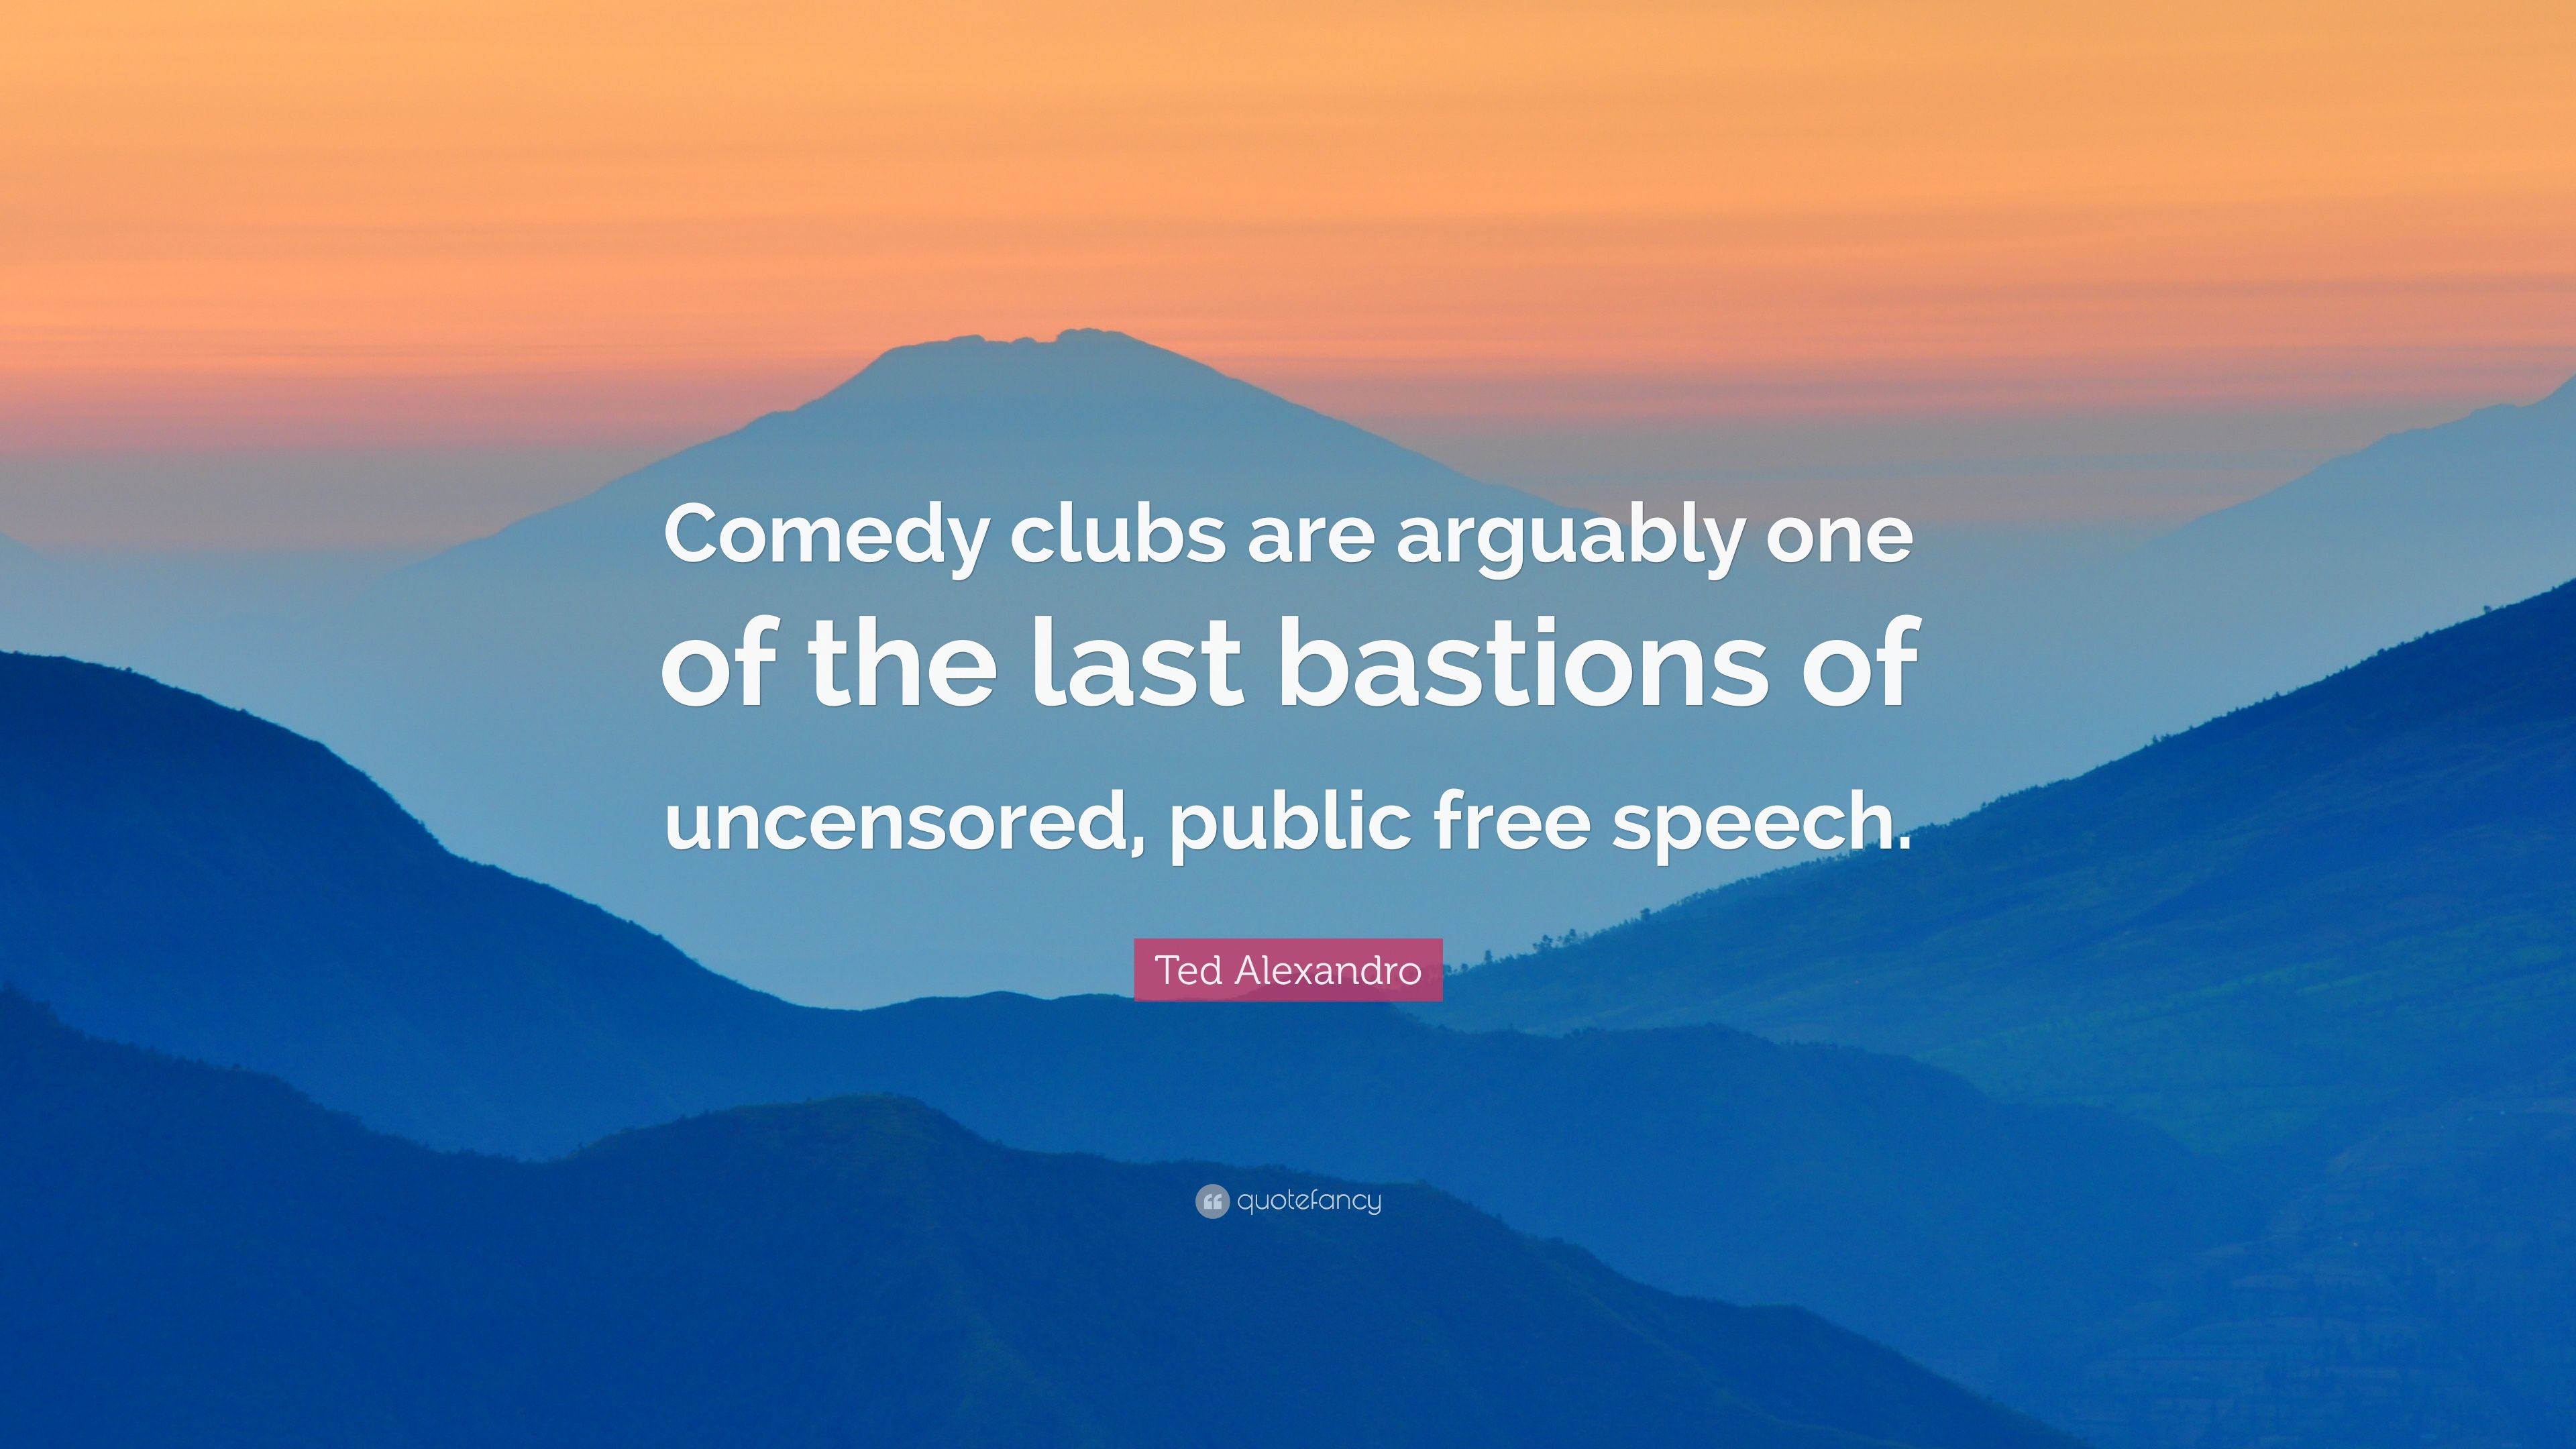 Ted Alexandro Quote: “Comedy clubs are arguably one of the last bastions of uncensored, public free speech.” (7 wallpaper)